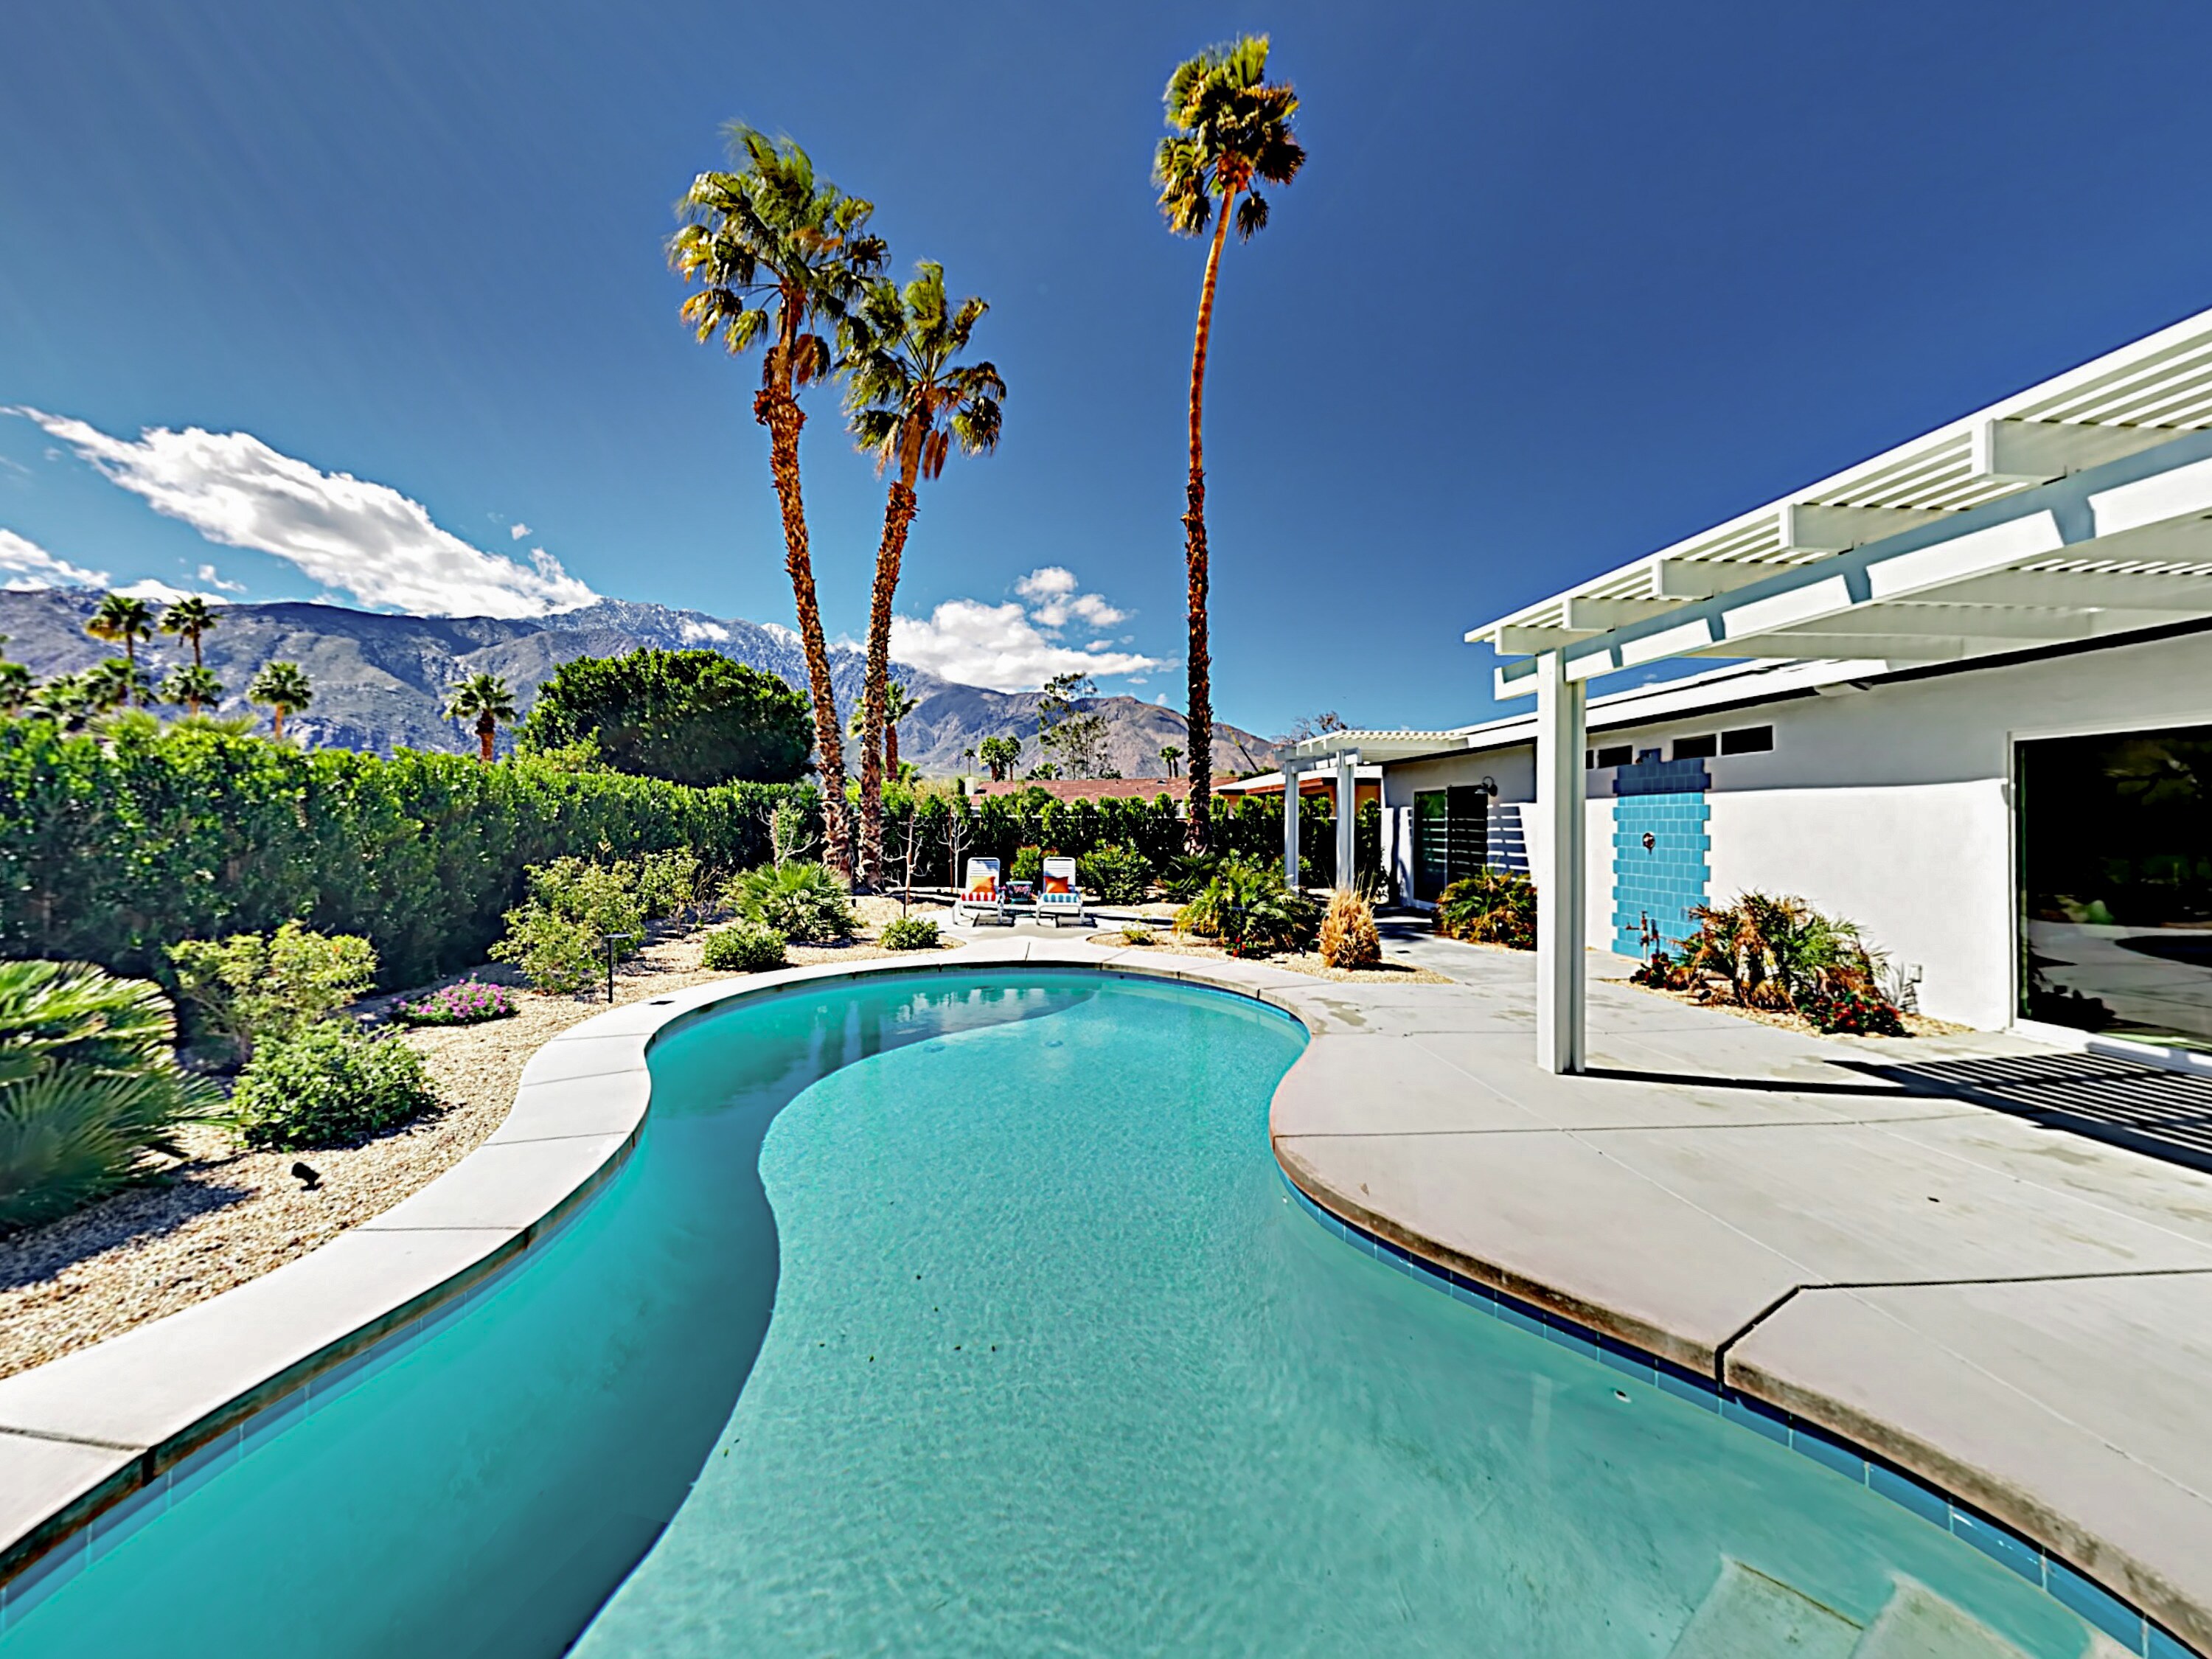 Welcome to Palm Springs! This home is professionally managed by TurnKey Vacation Rentals.